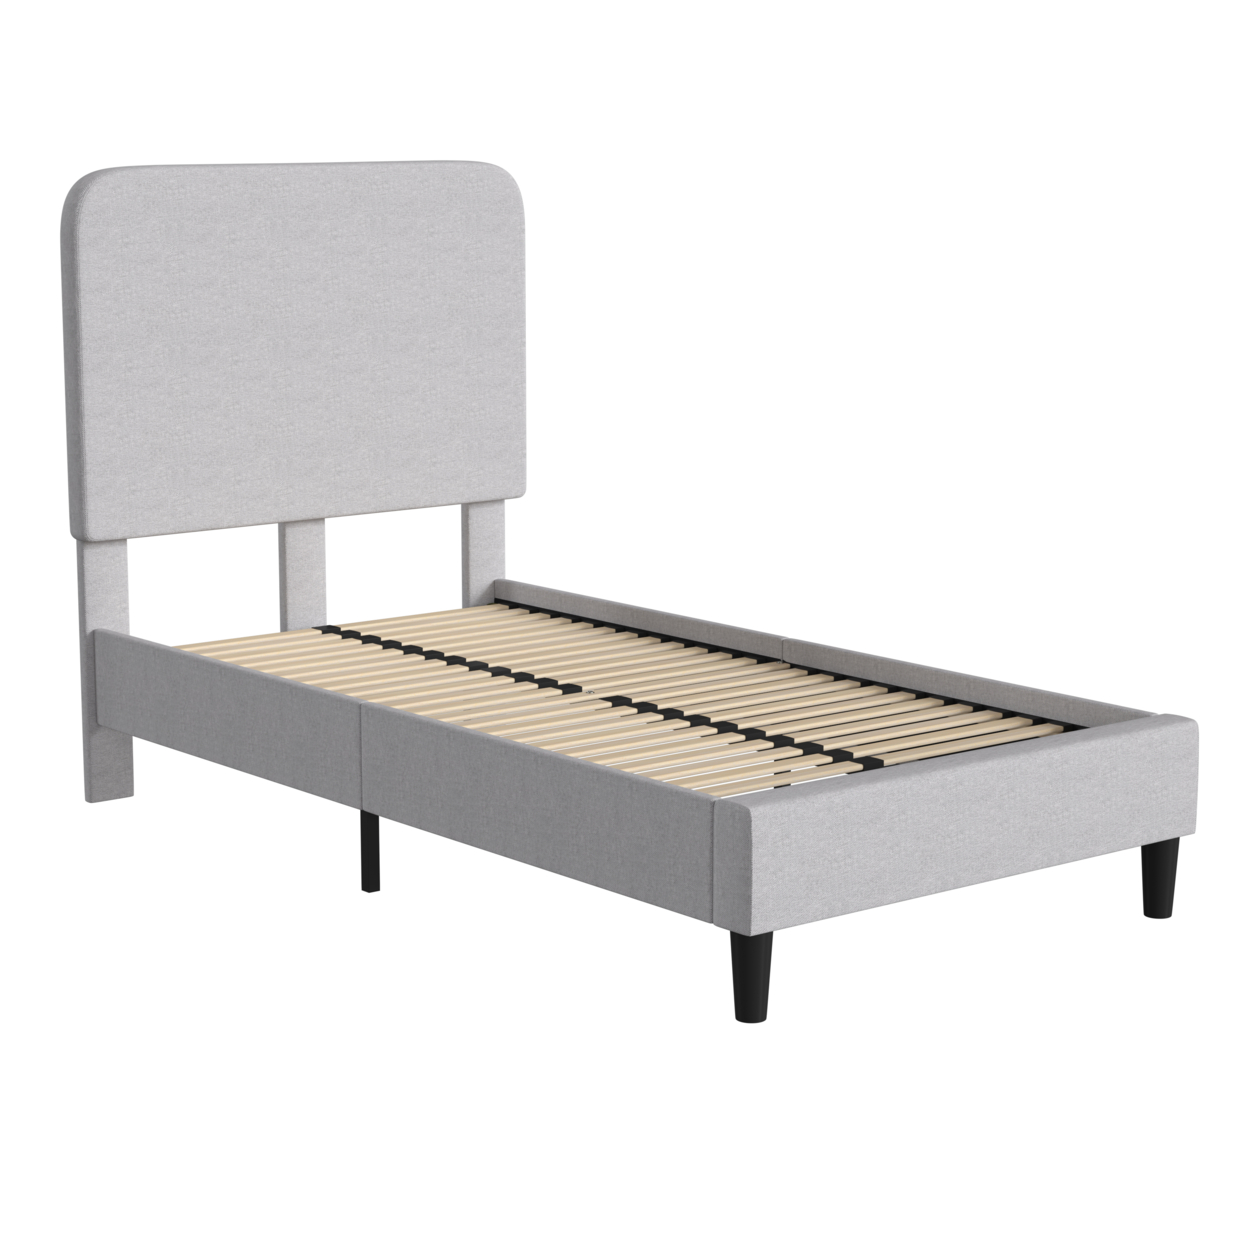 Addison Light Grey Twin Fabric Upholstered Platform Bed - Headboard With Rounded Edges - No Box Spring Or Foundation Needed